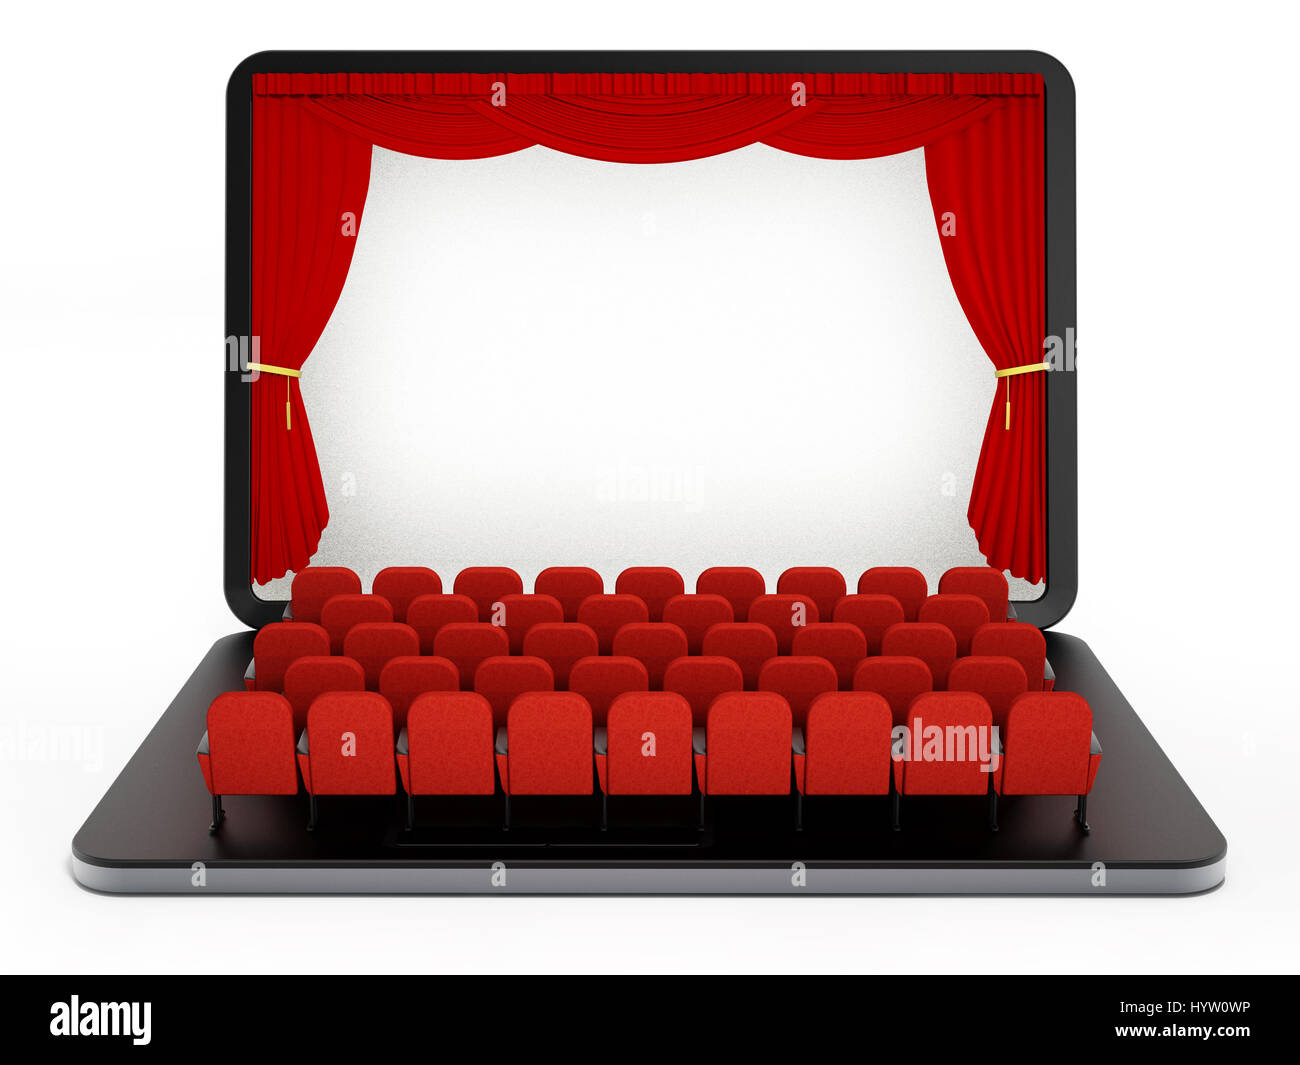 Red seats on laptop computer with blank screen. 3D illustration. Stock Photo